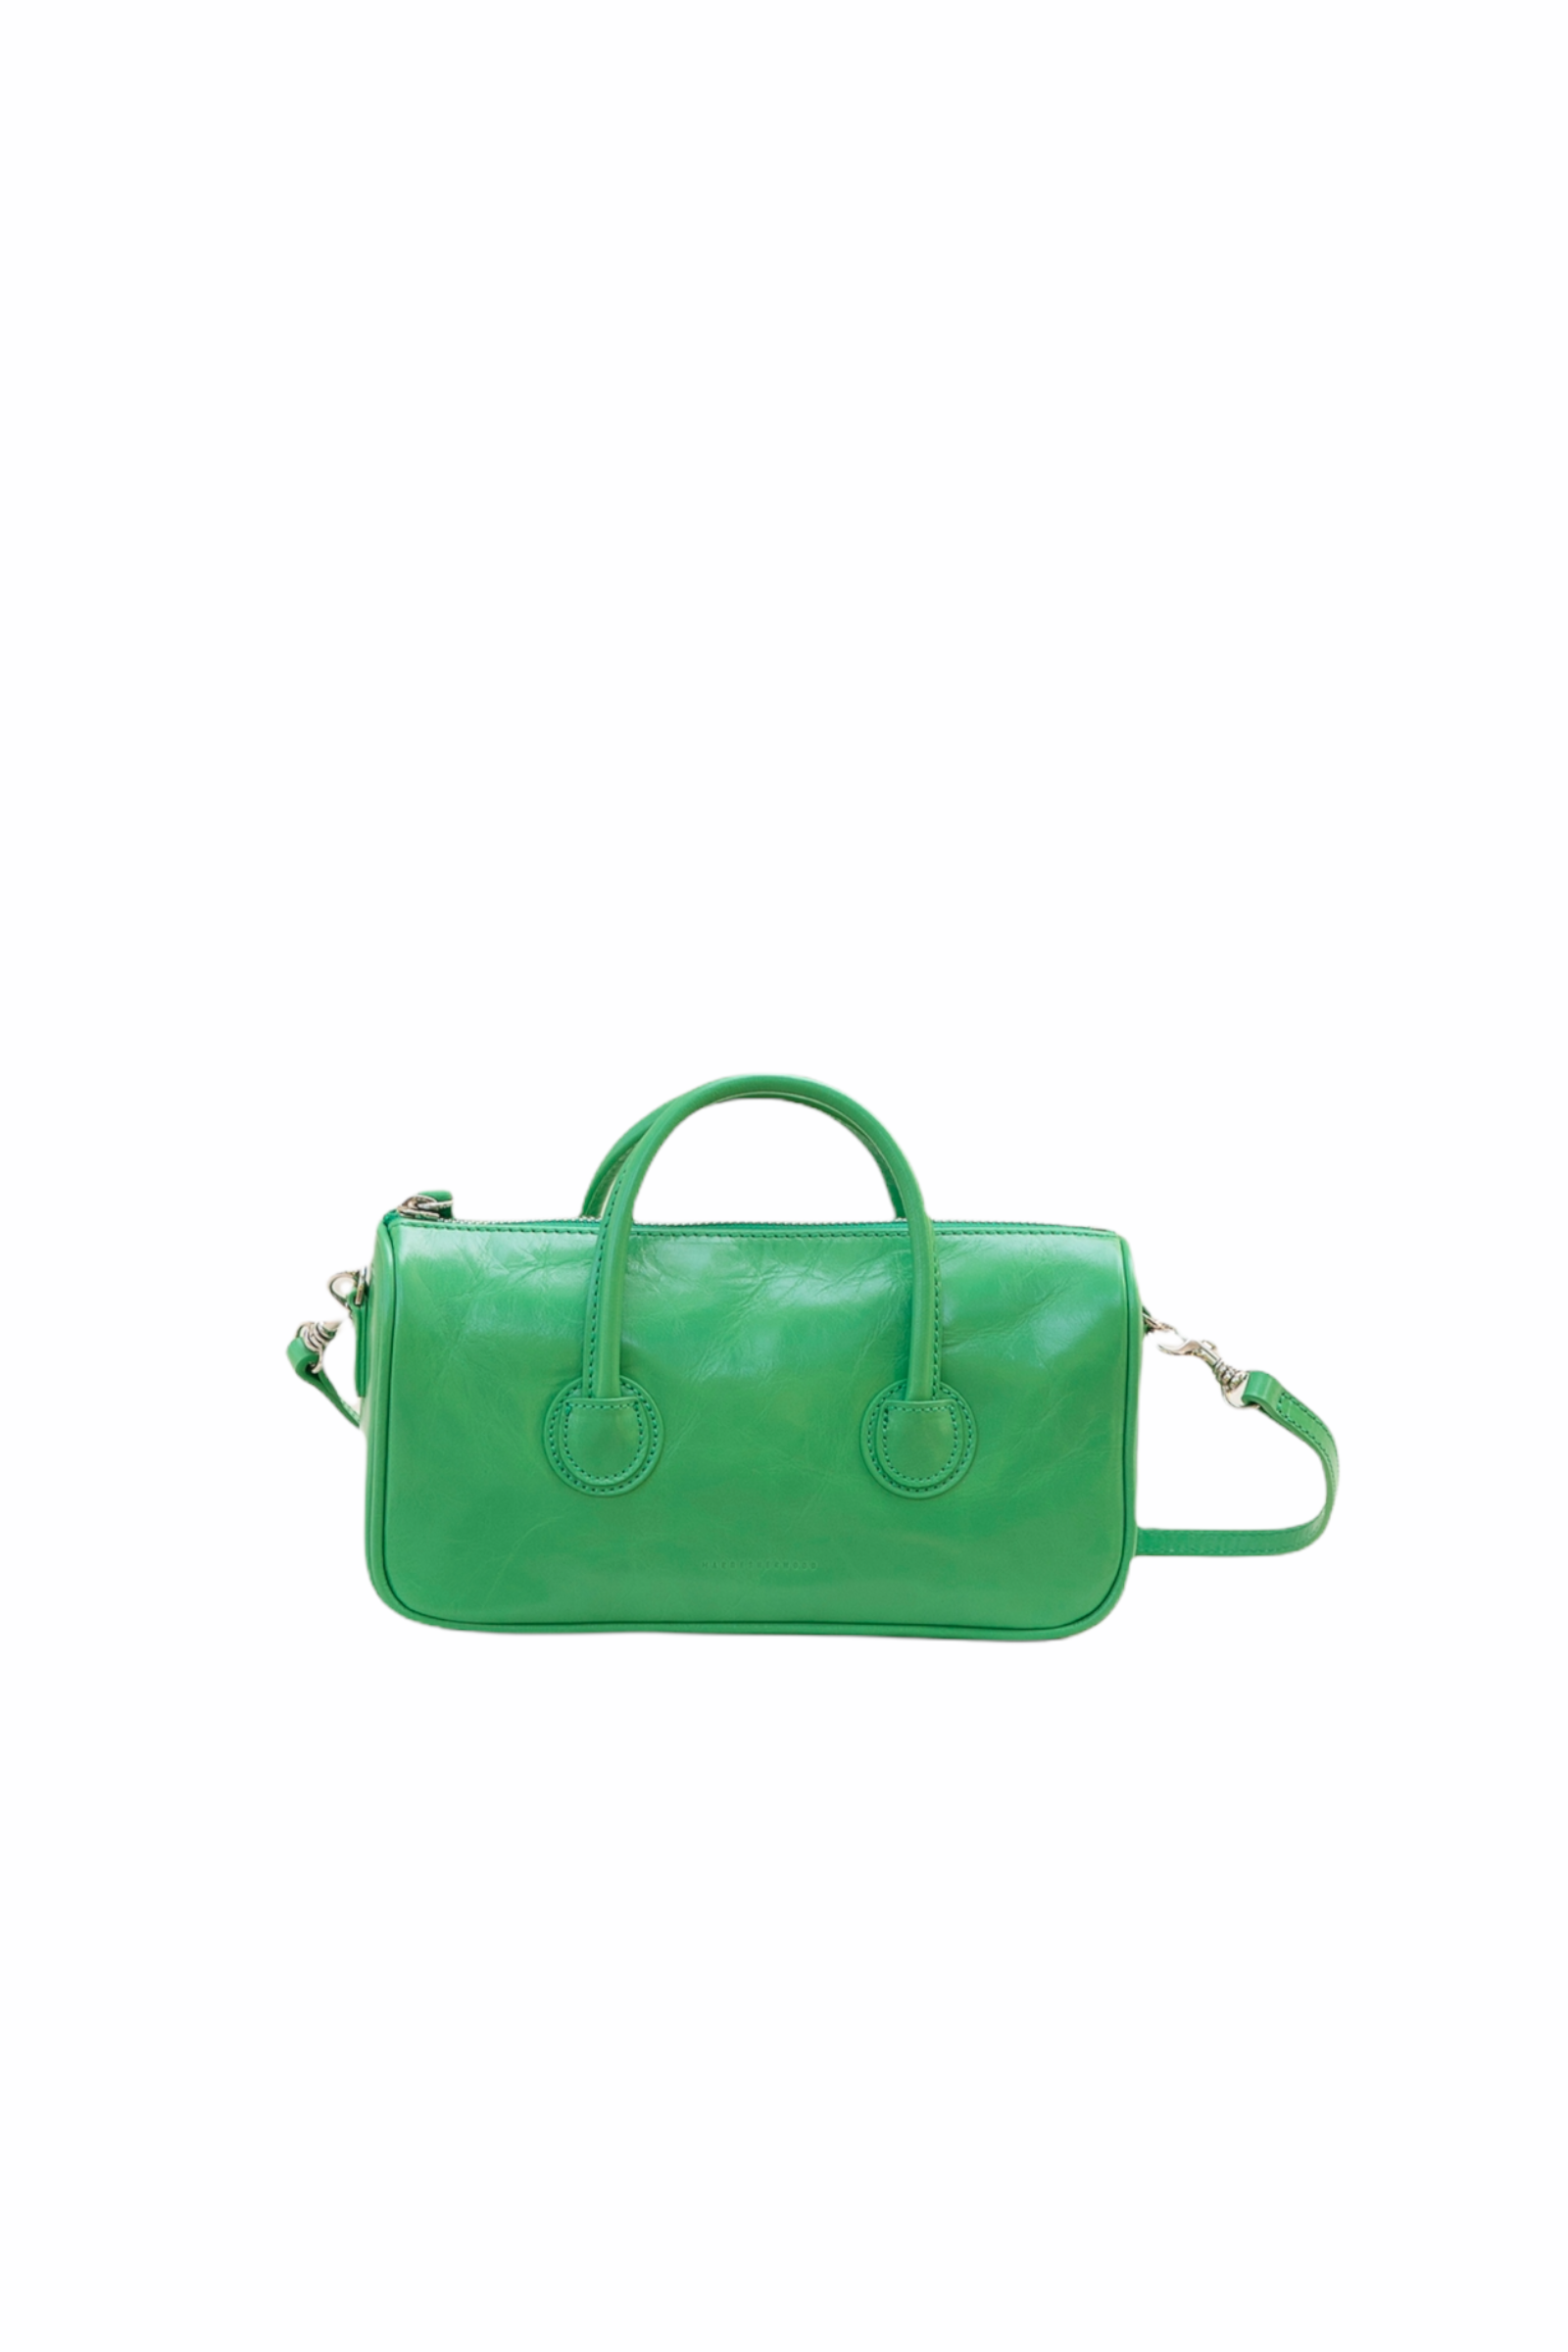 BESSETTE BAG W/ CROSS STRAP IN GREEN PATENT BY MARGESHERWOOD